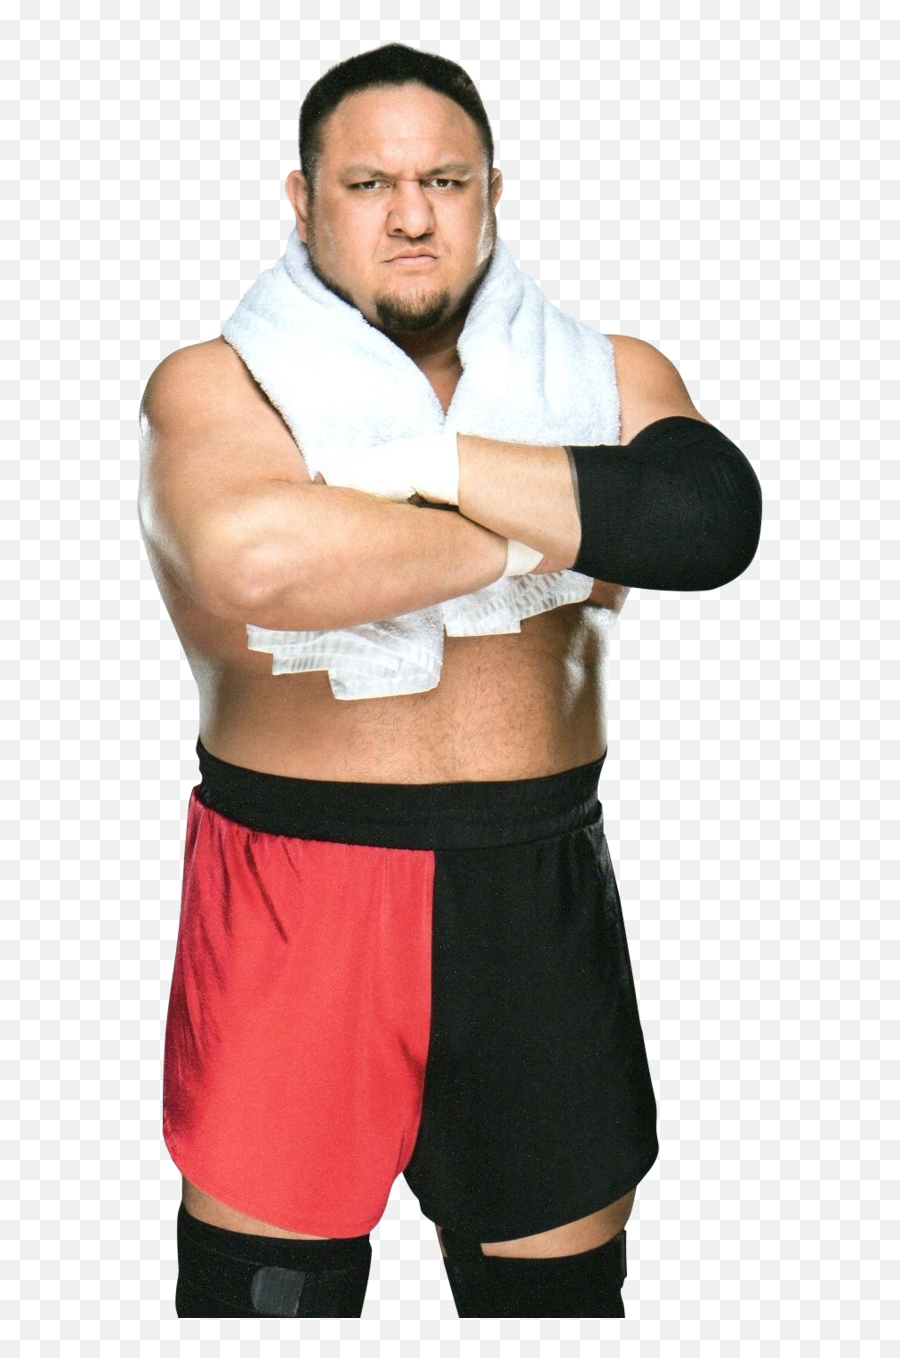 Samoa Joe 2017 Png 8 Image - Wwe Samoa Joe Png 2020,Samoa Joe Png